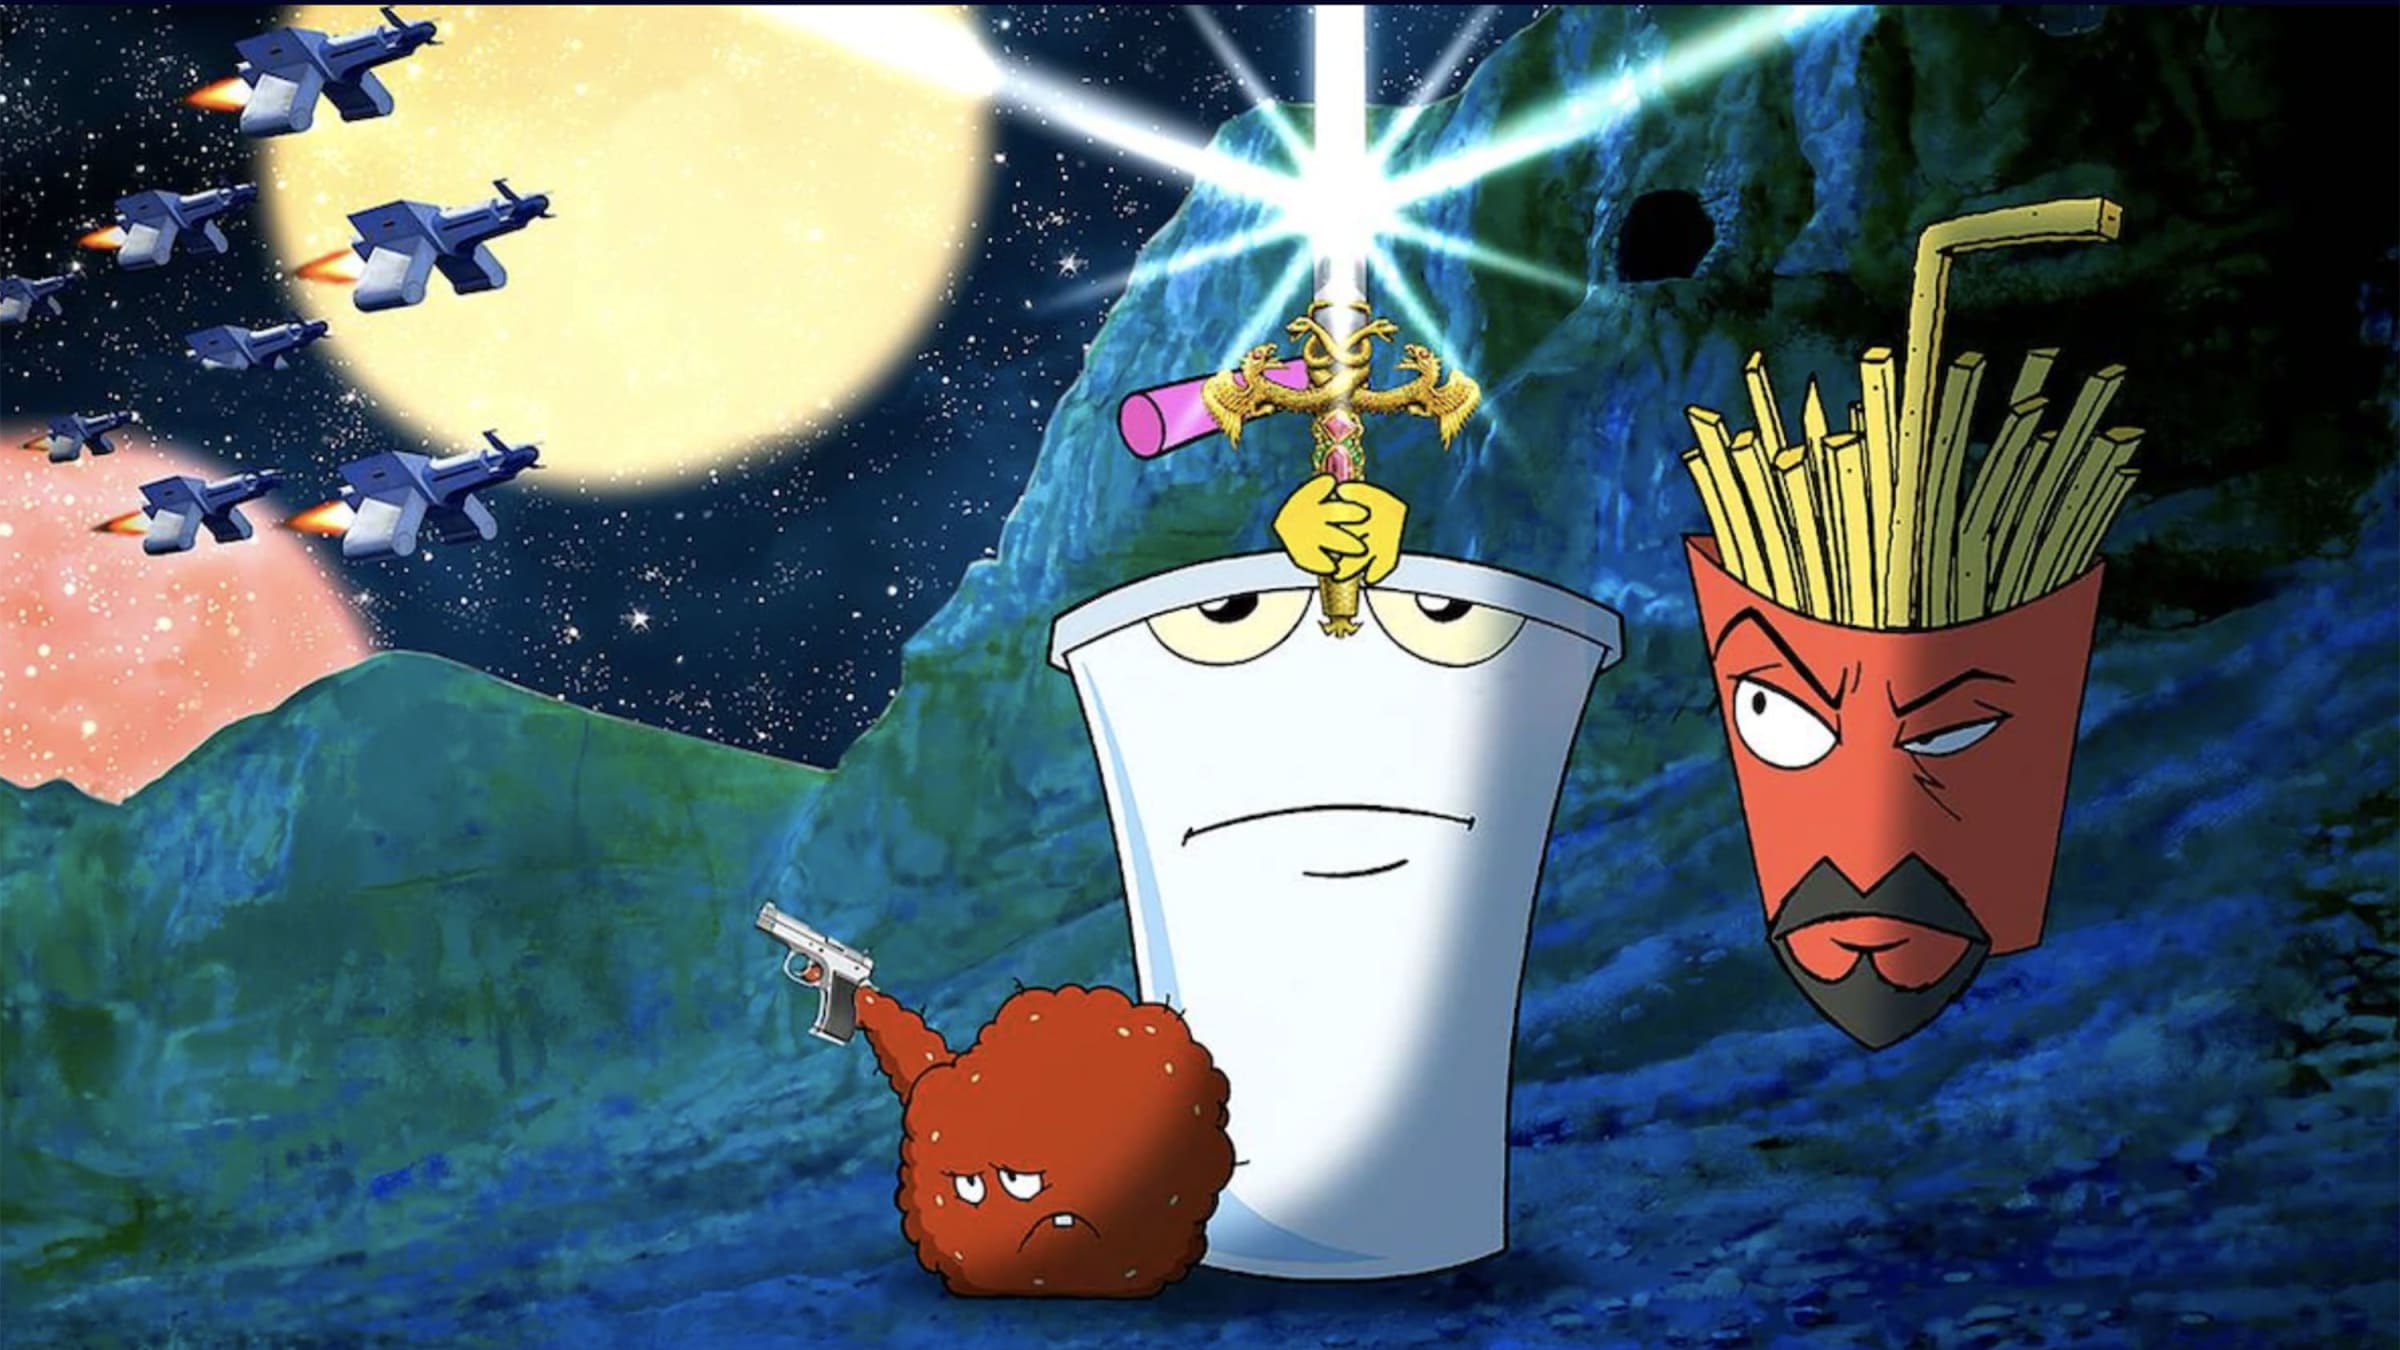 Adult Swim Quietly Retires Offensive TV Episodes of Aqua Teen Hunger Force and The Boondocks